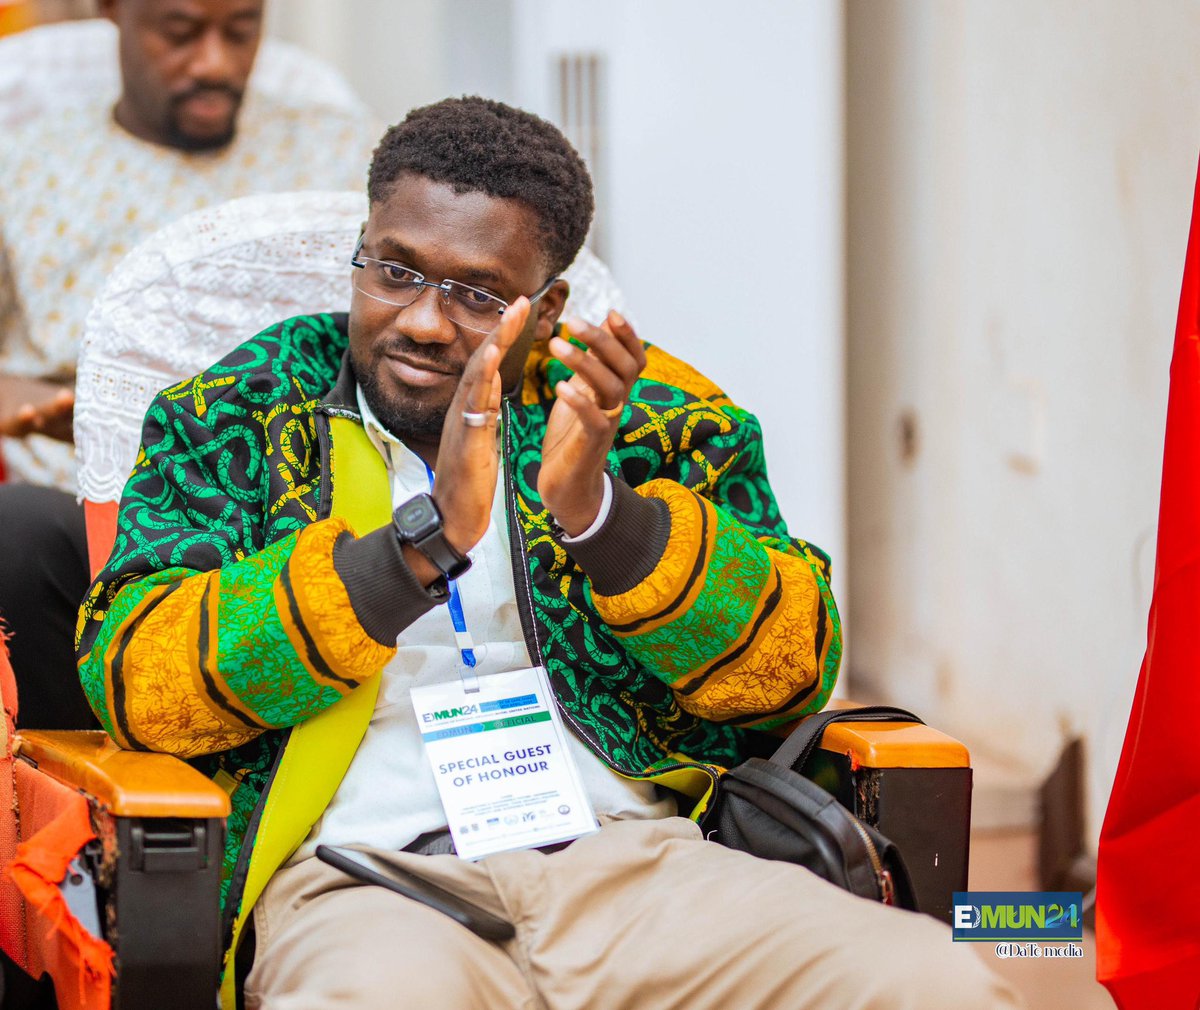 Grateful for the experience at EDMUN 24, hosted by the University of Cape Coast. It was an opportunity to engage and connect with fellow participants. Looking to carrying the inspiration forward. #AskALibrarian #EDMUN24